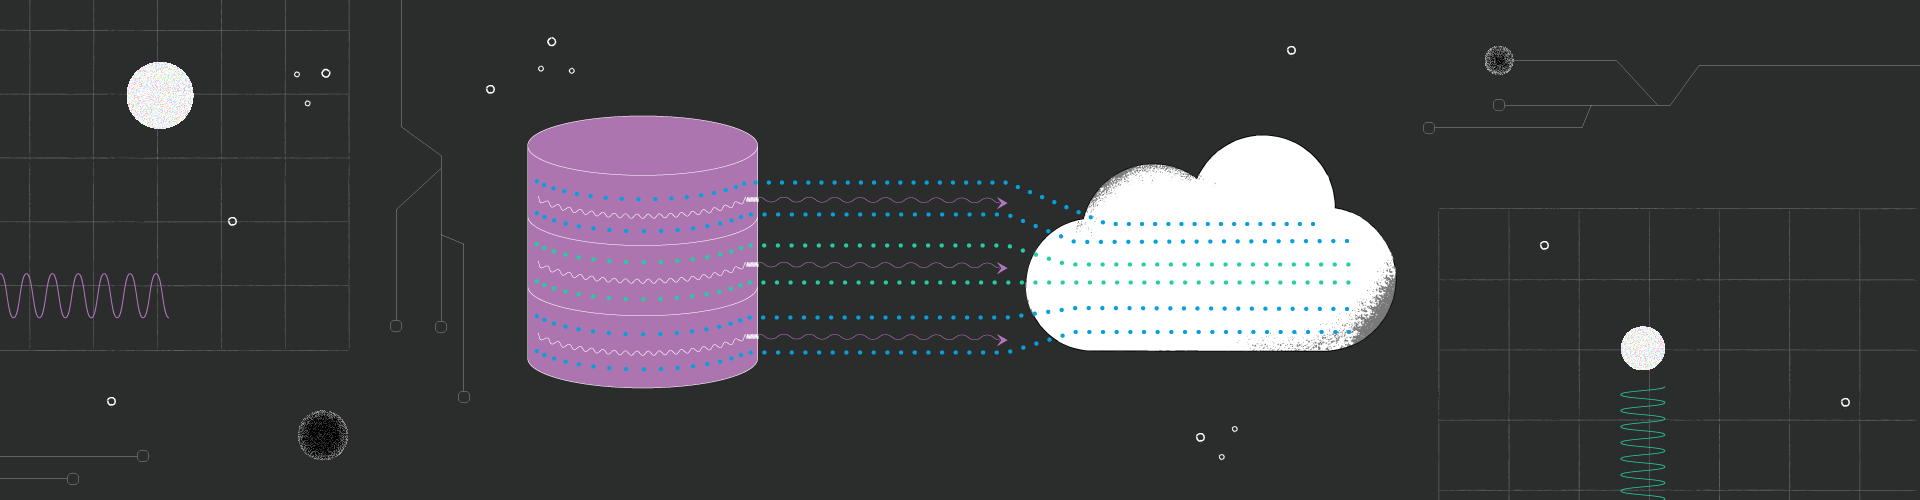 Cloud Data Migration Process: A Step-by-Step Guide to Transferring Data to the Cloud